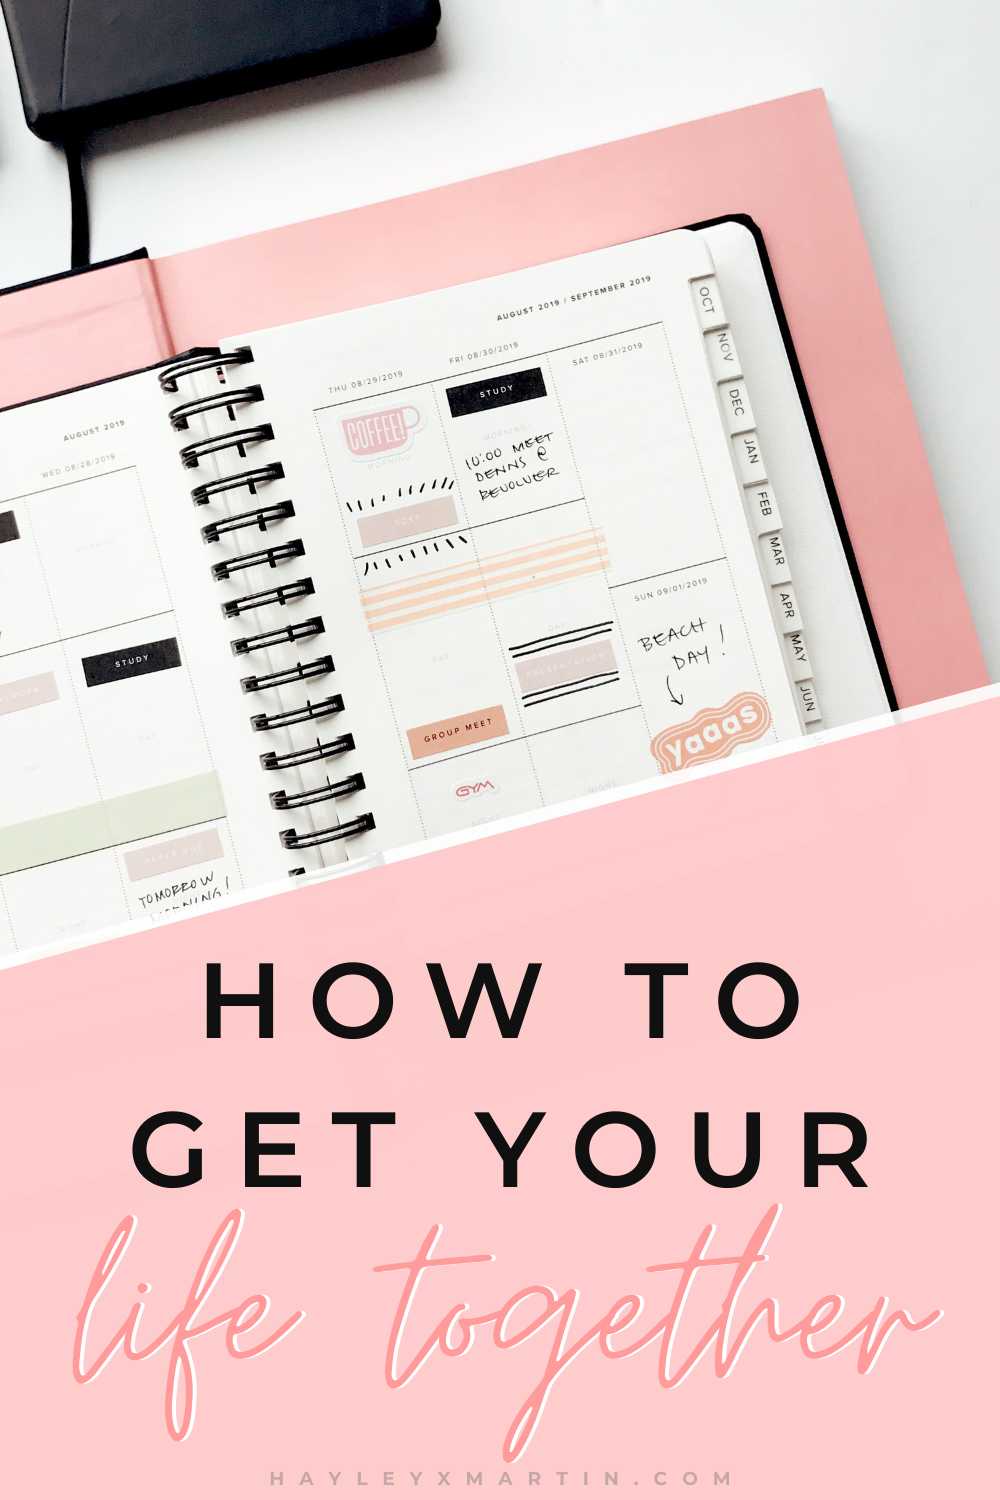 HOW TO GET YOUR LIFE TOGETHER | HAYLEYXMARTIN